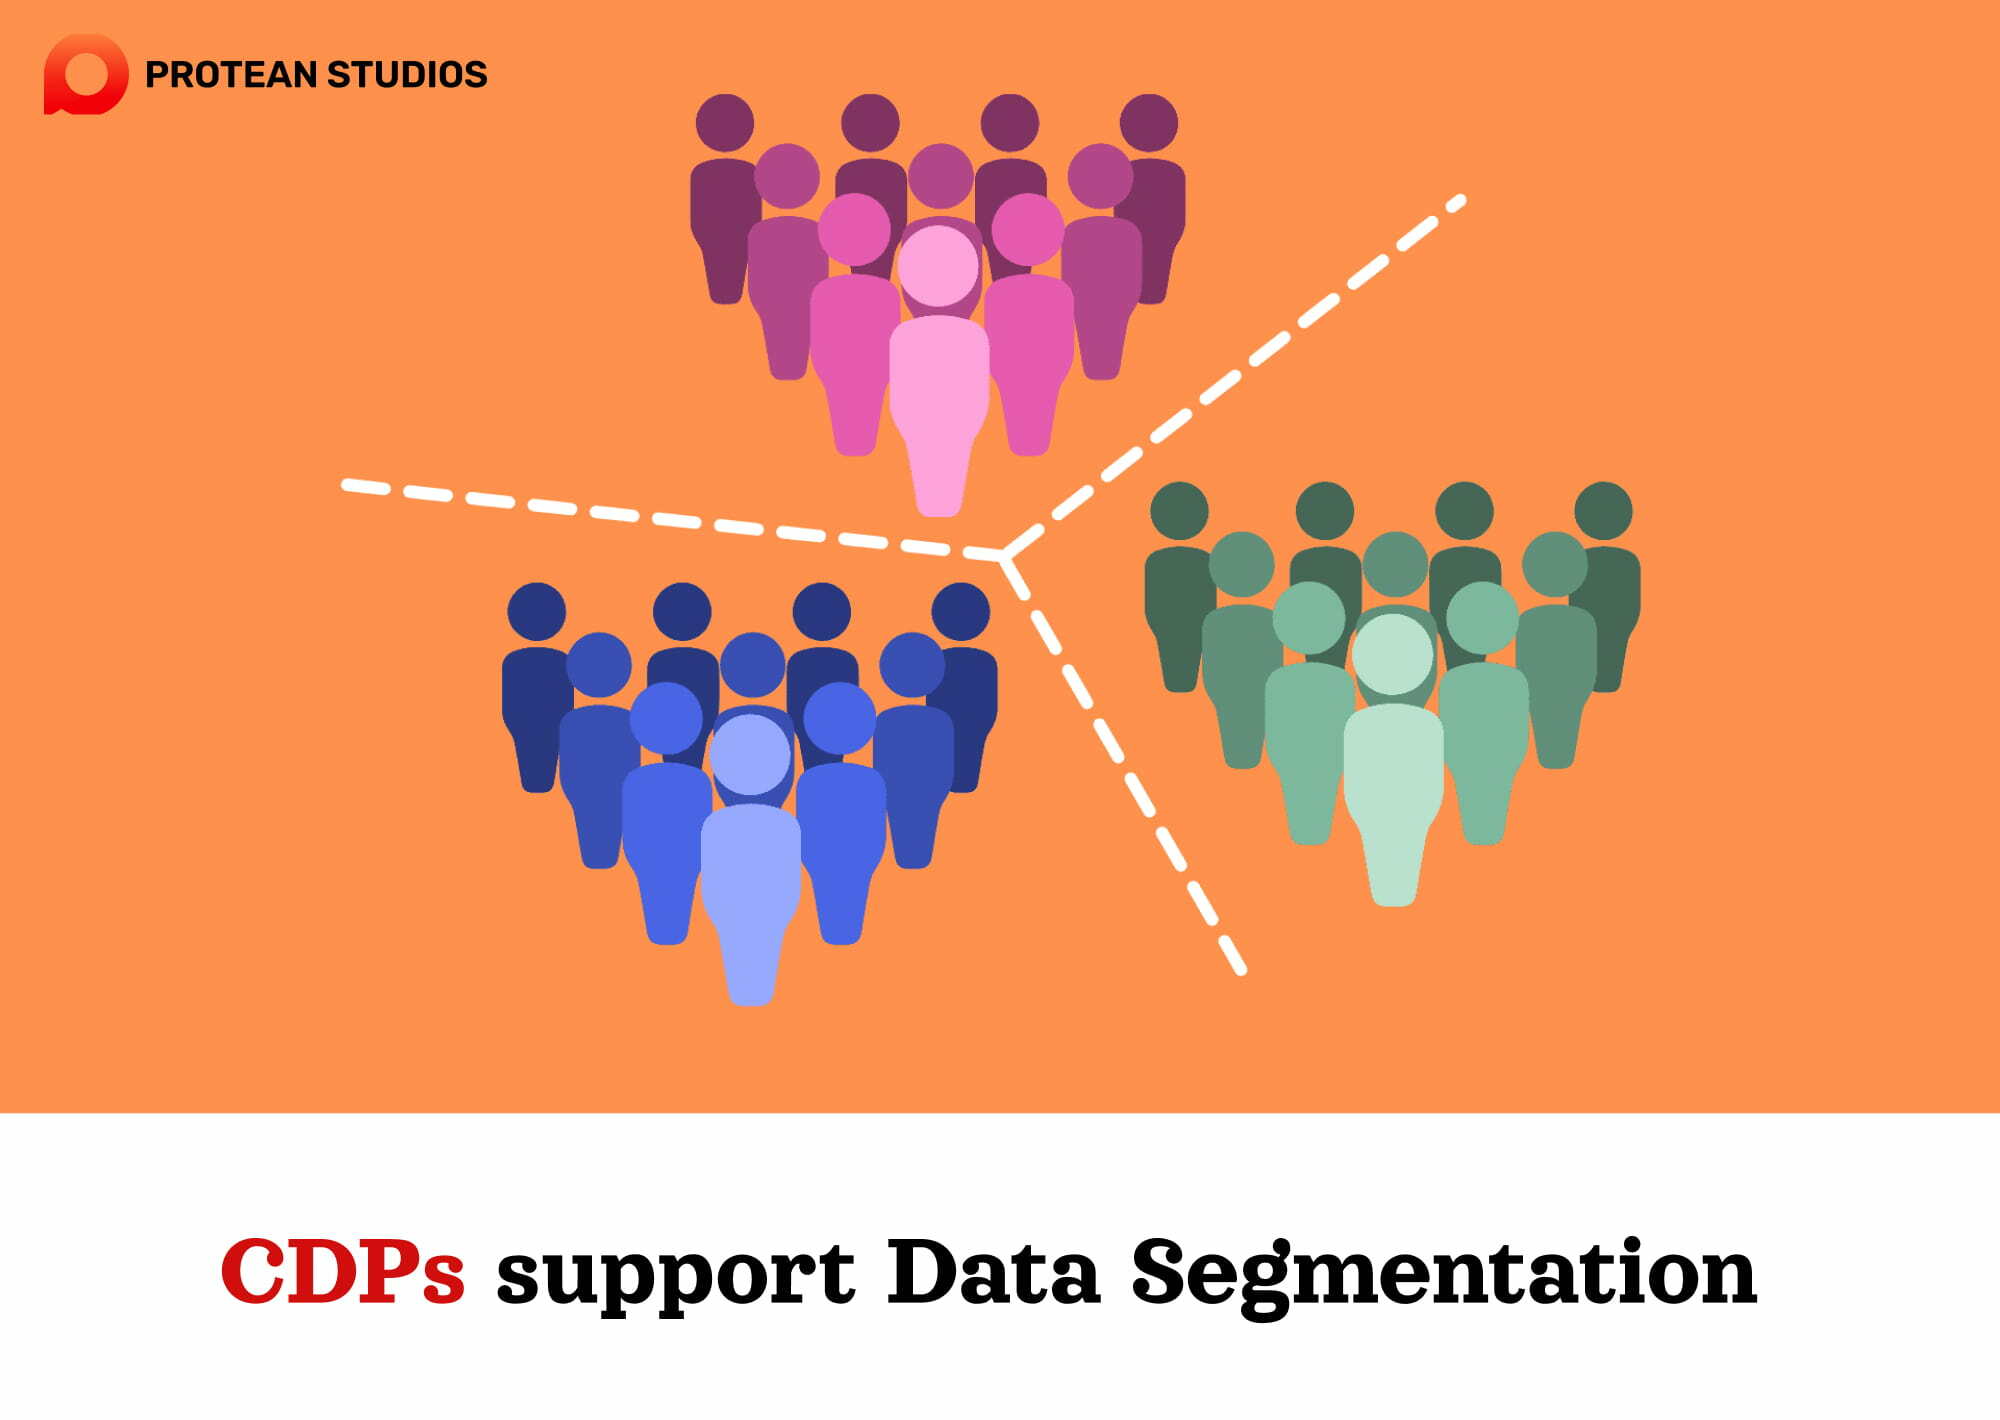 CDPs can support the process of data segmentation